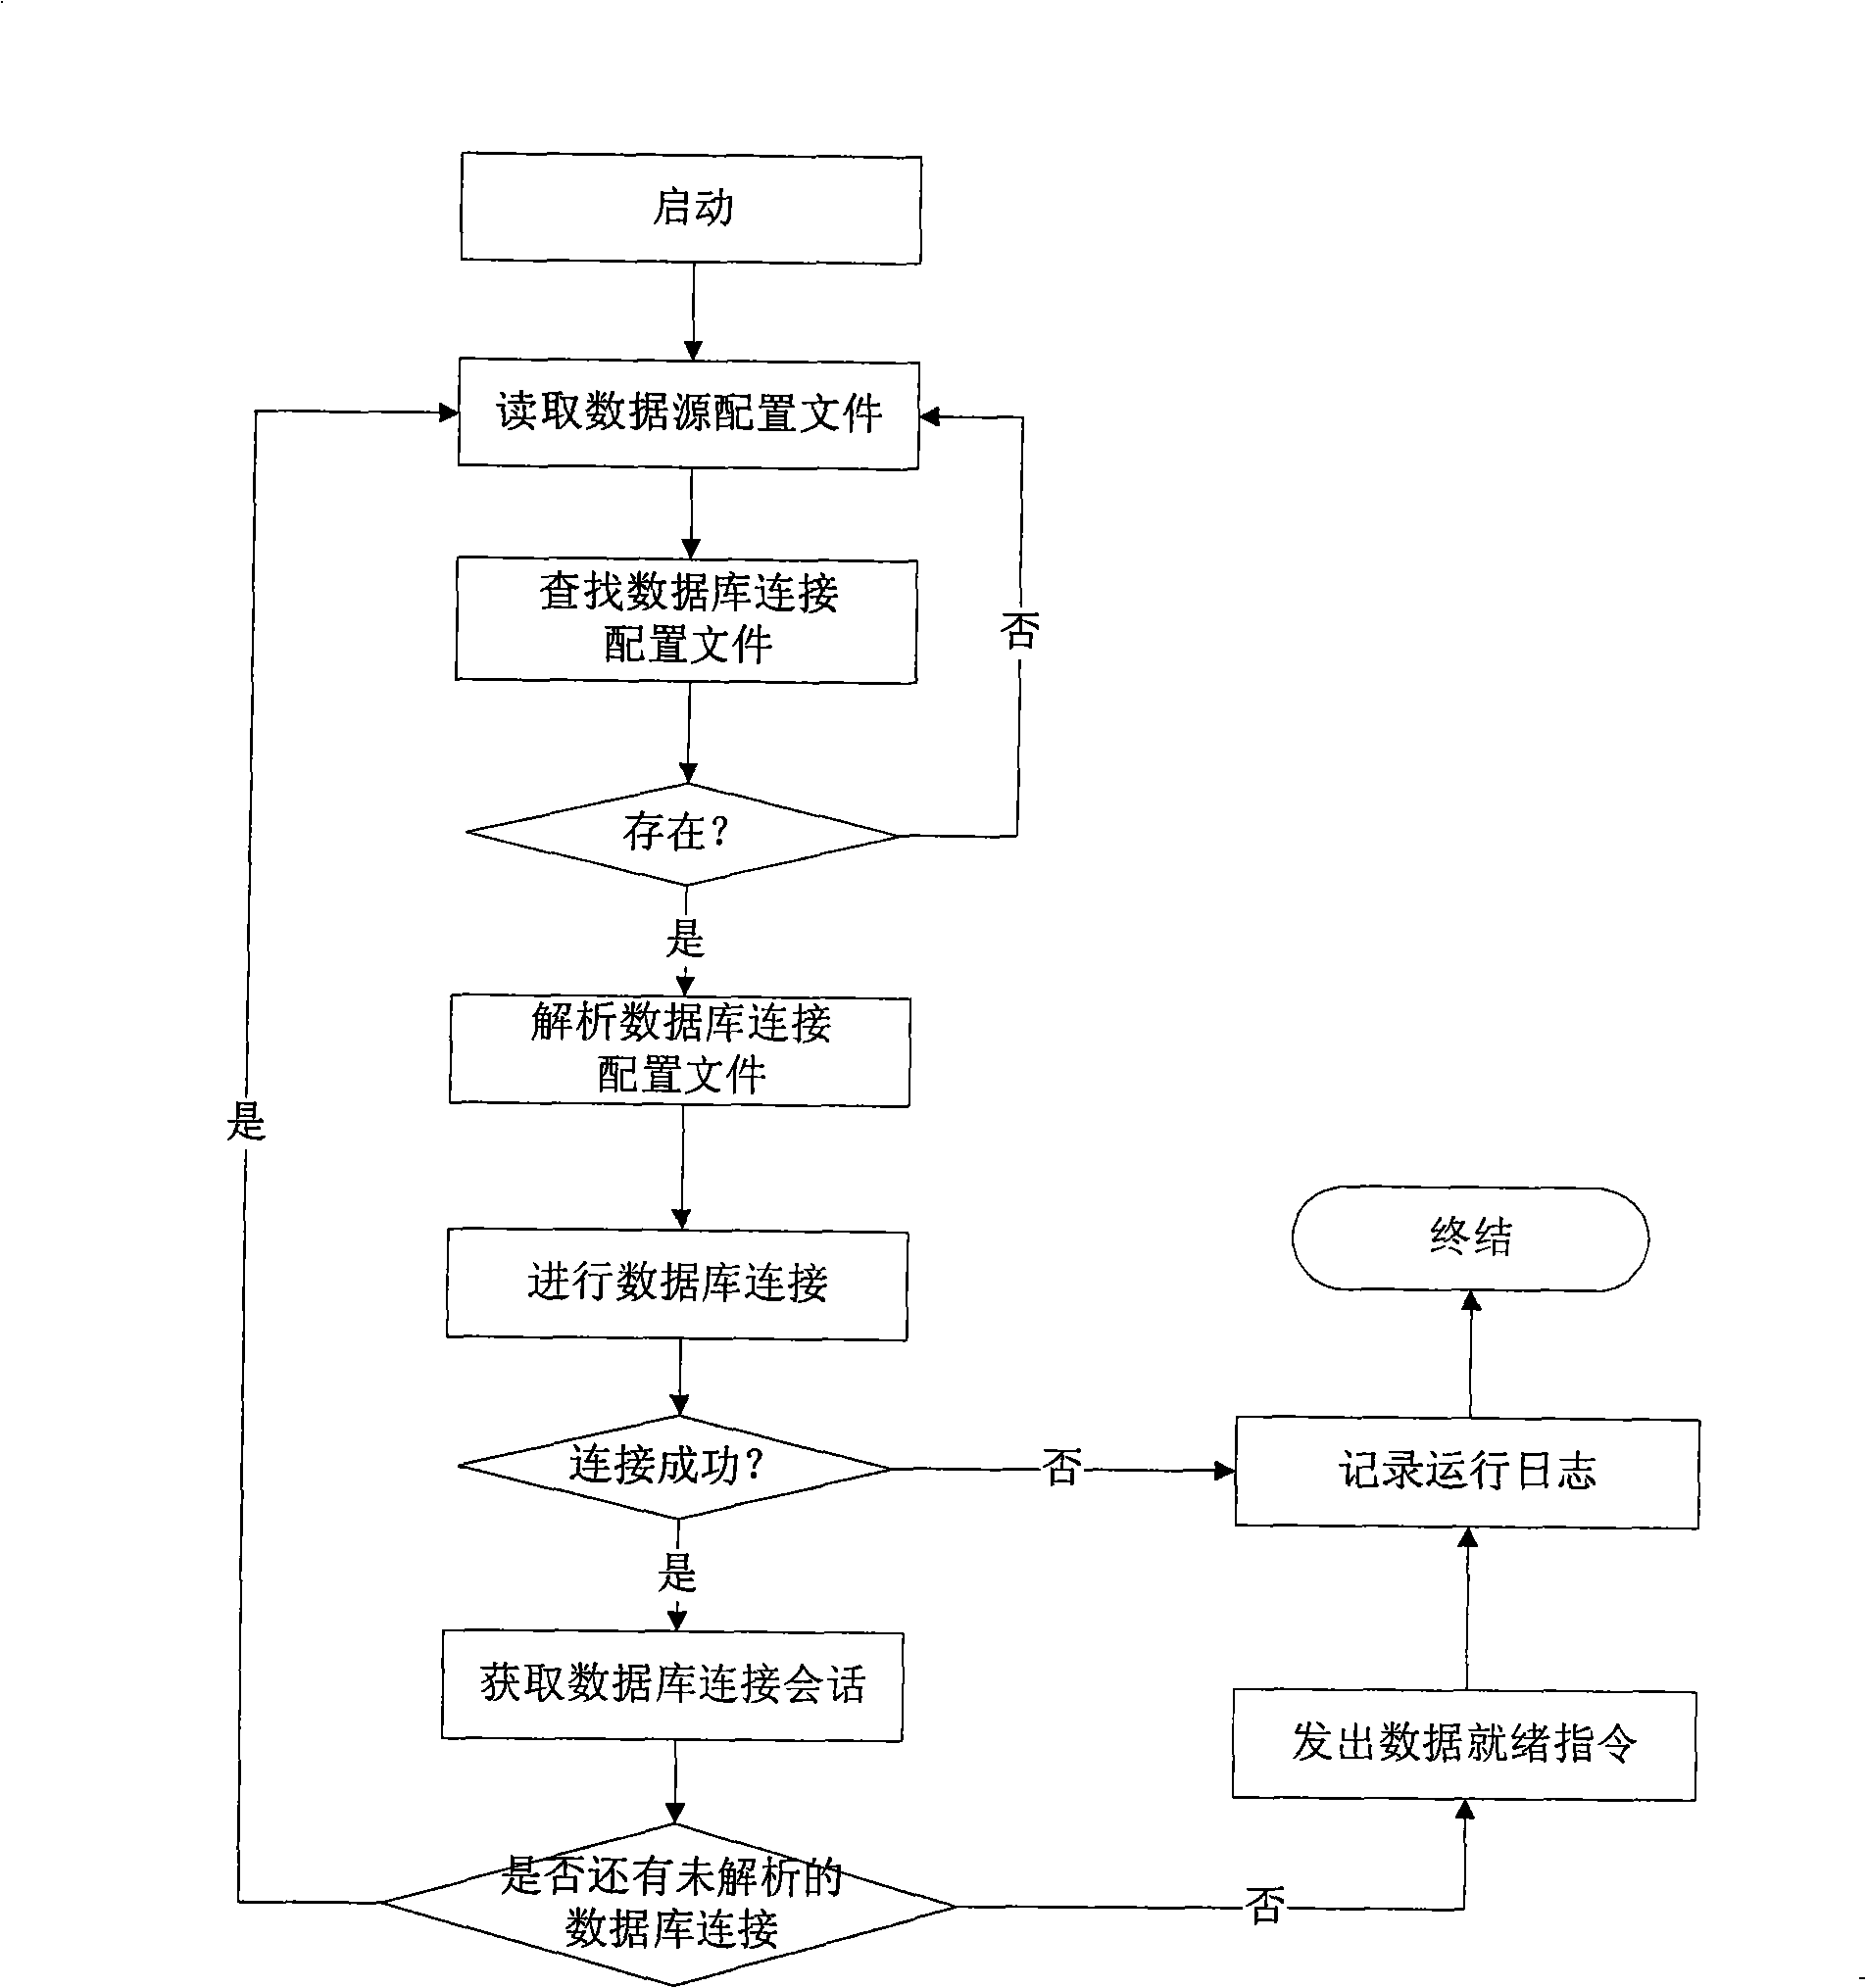 Data integration and application service system based on electric communication field sharing information model